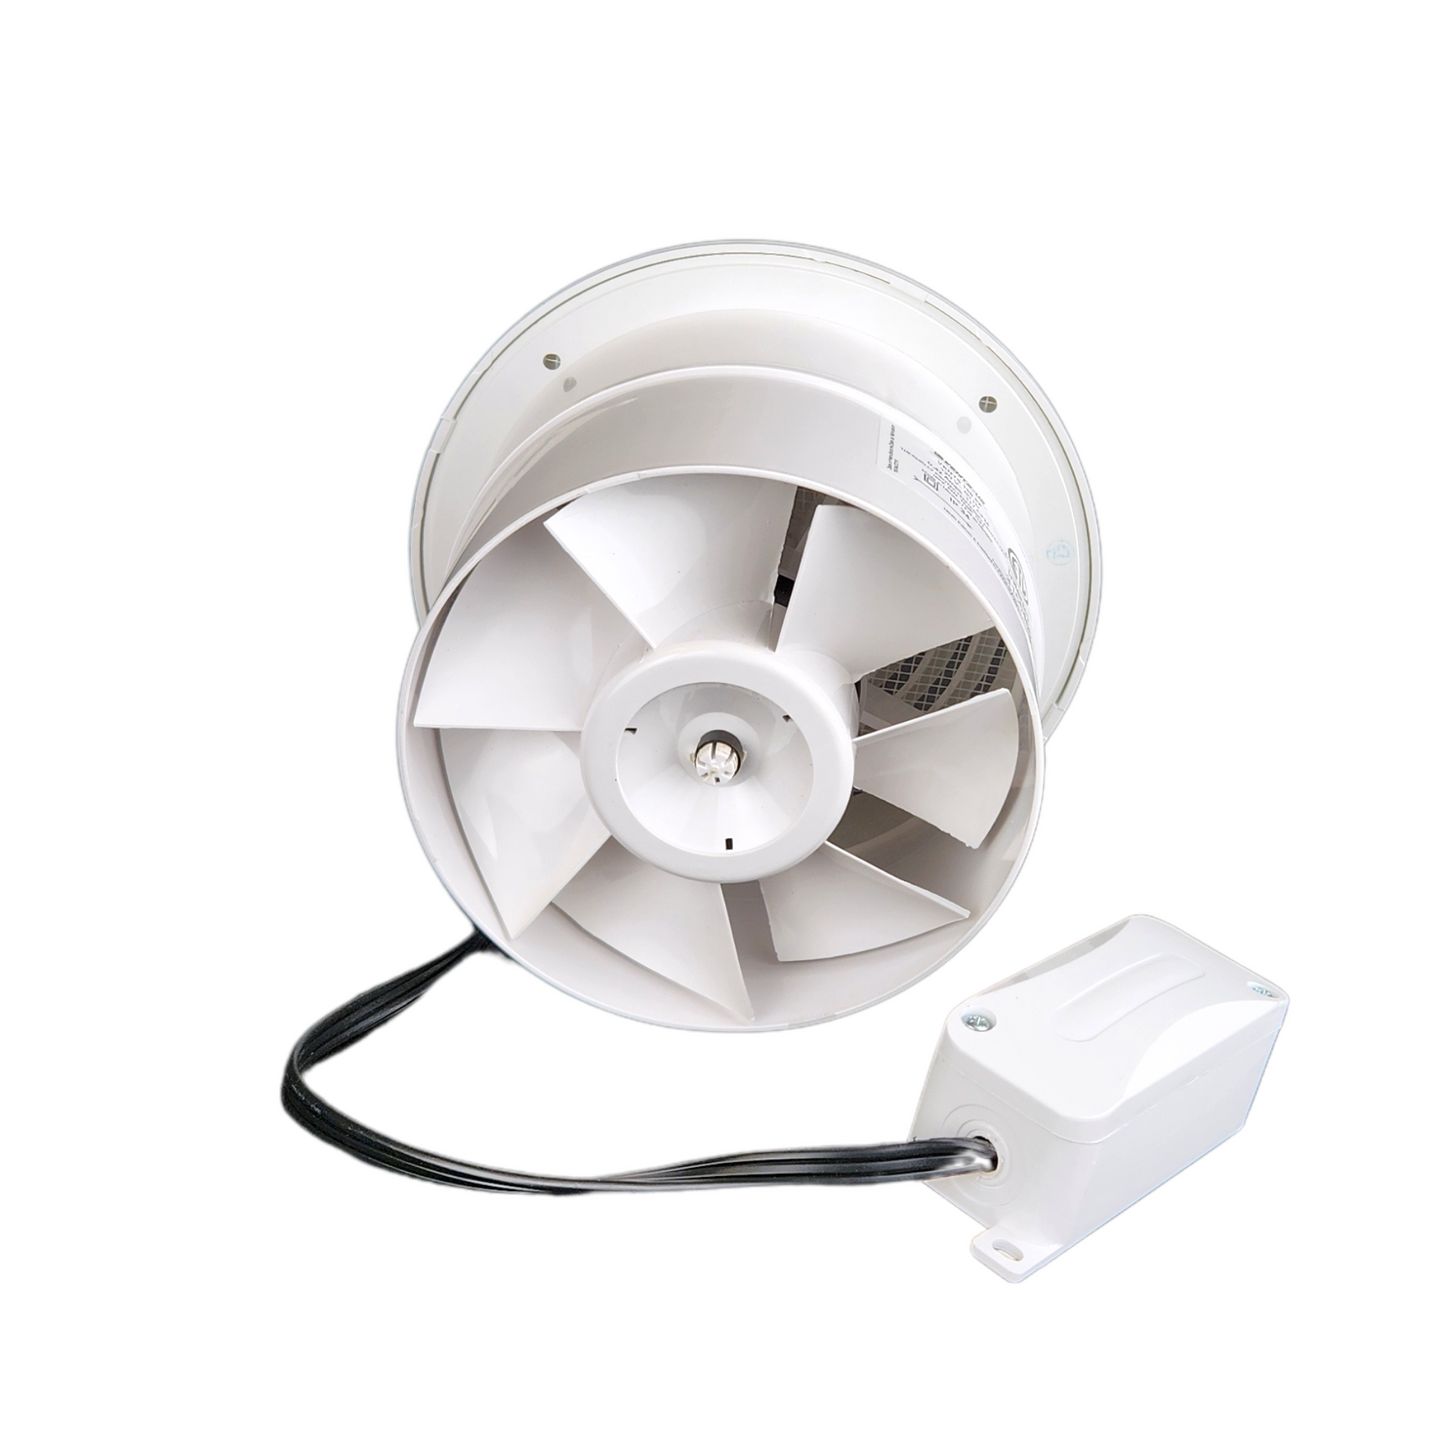 Vents PF 150 Round Axial Wall Fan